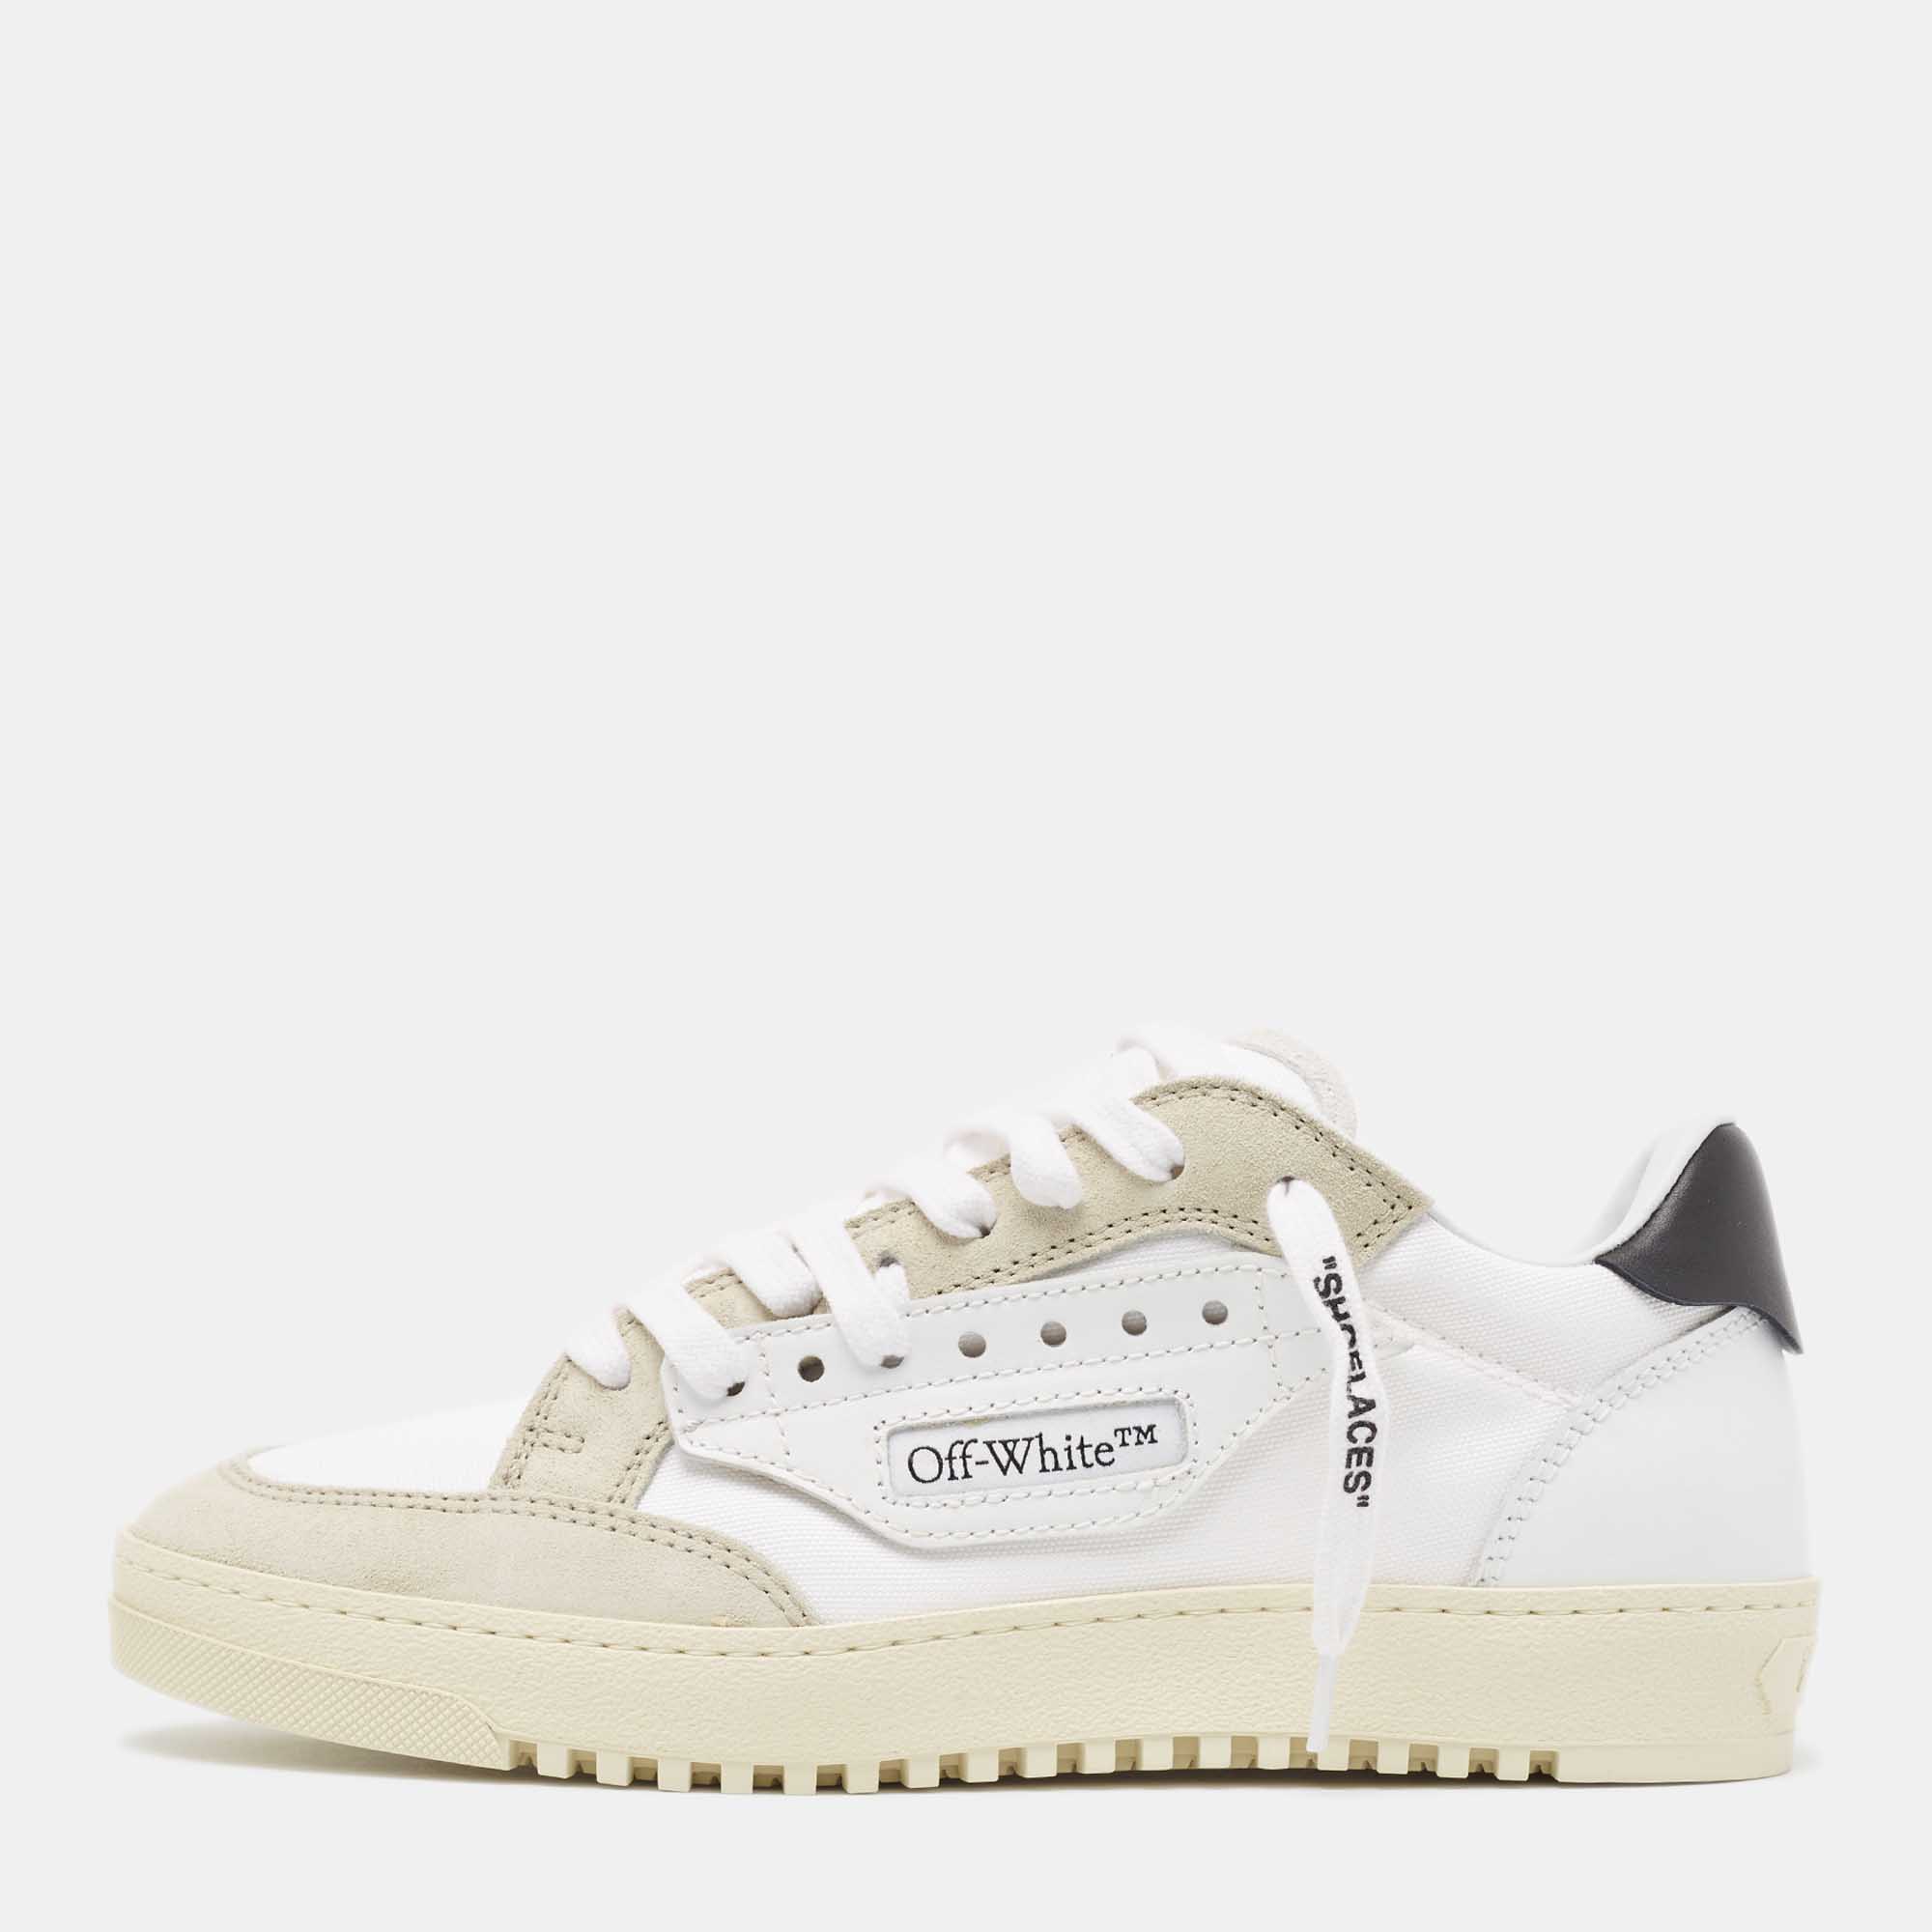 Pre-owned Off-white Multicolor Canvas And Leather 5.0 Sneakers Size 38